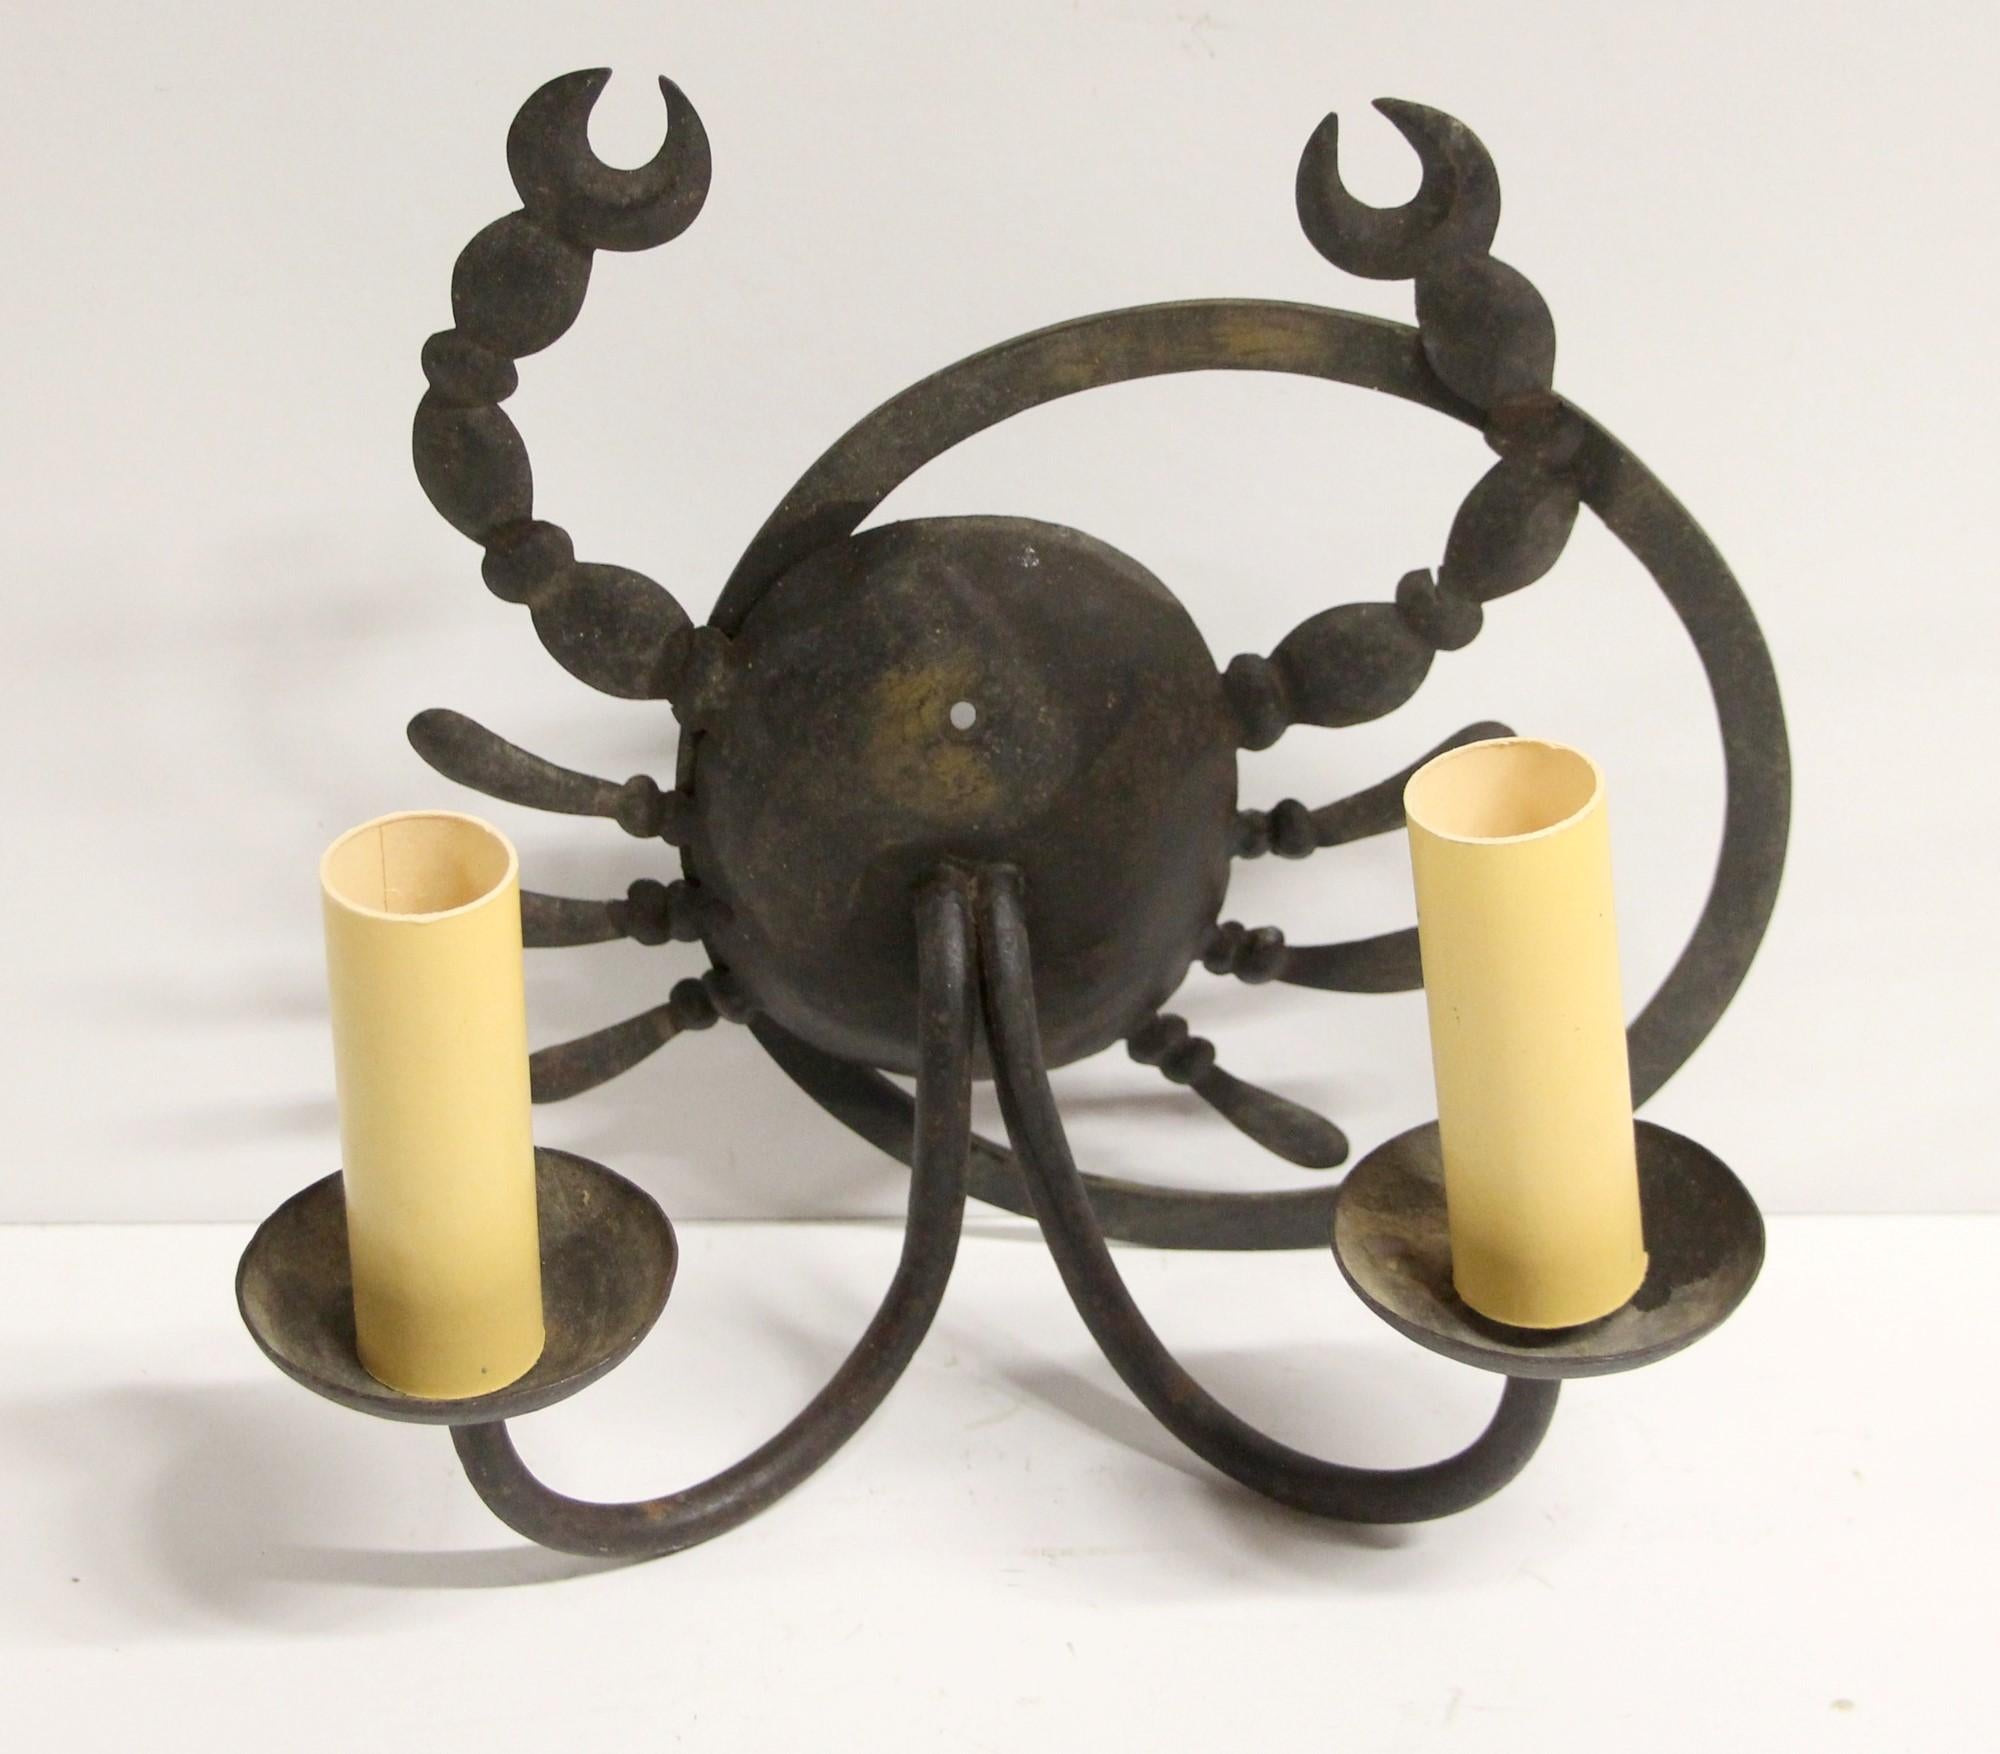 Unusual black iron wall sconce in the shape of a scorpion. Uses two household light bulbs. One available.